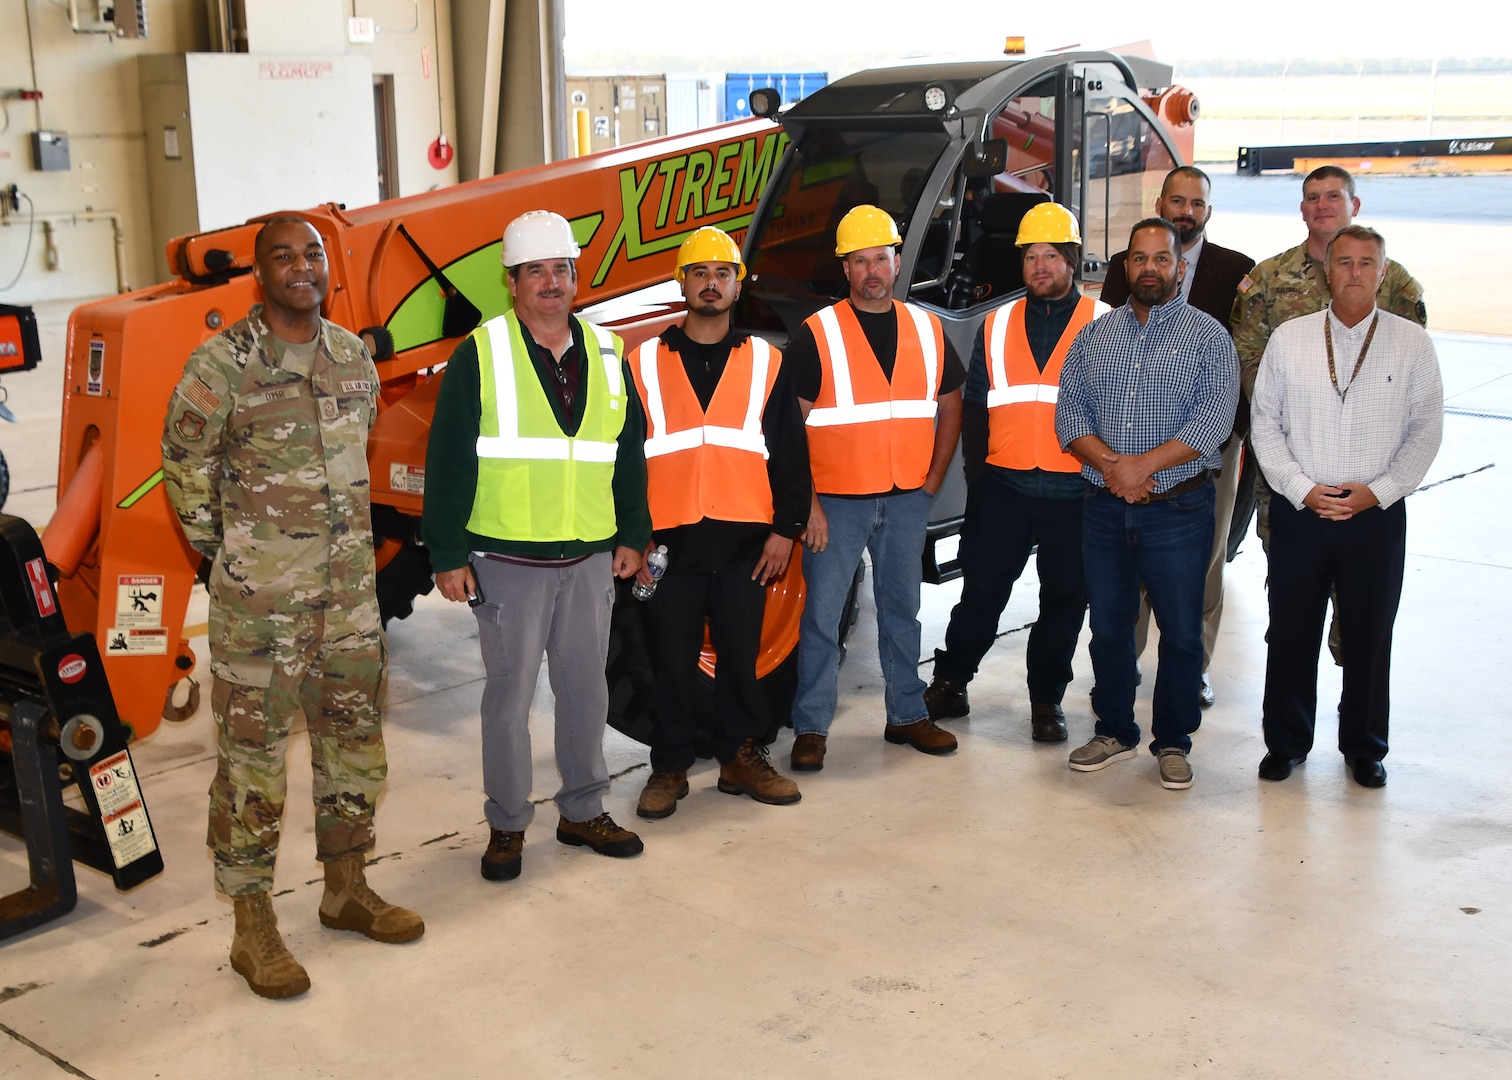 group shot in front of machinery to include soldier, civilians in construction gear and other business professionals